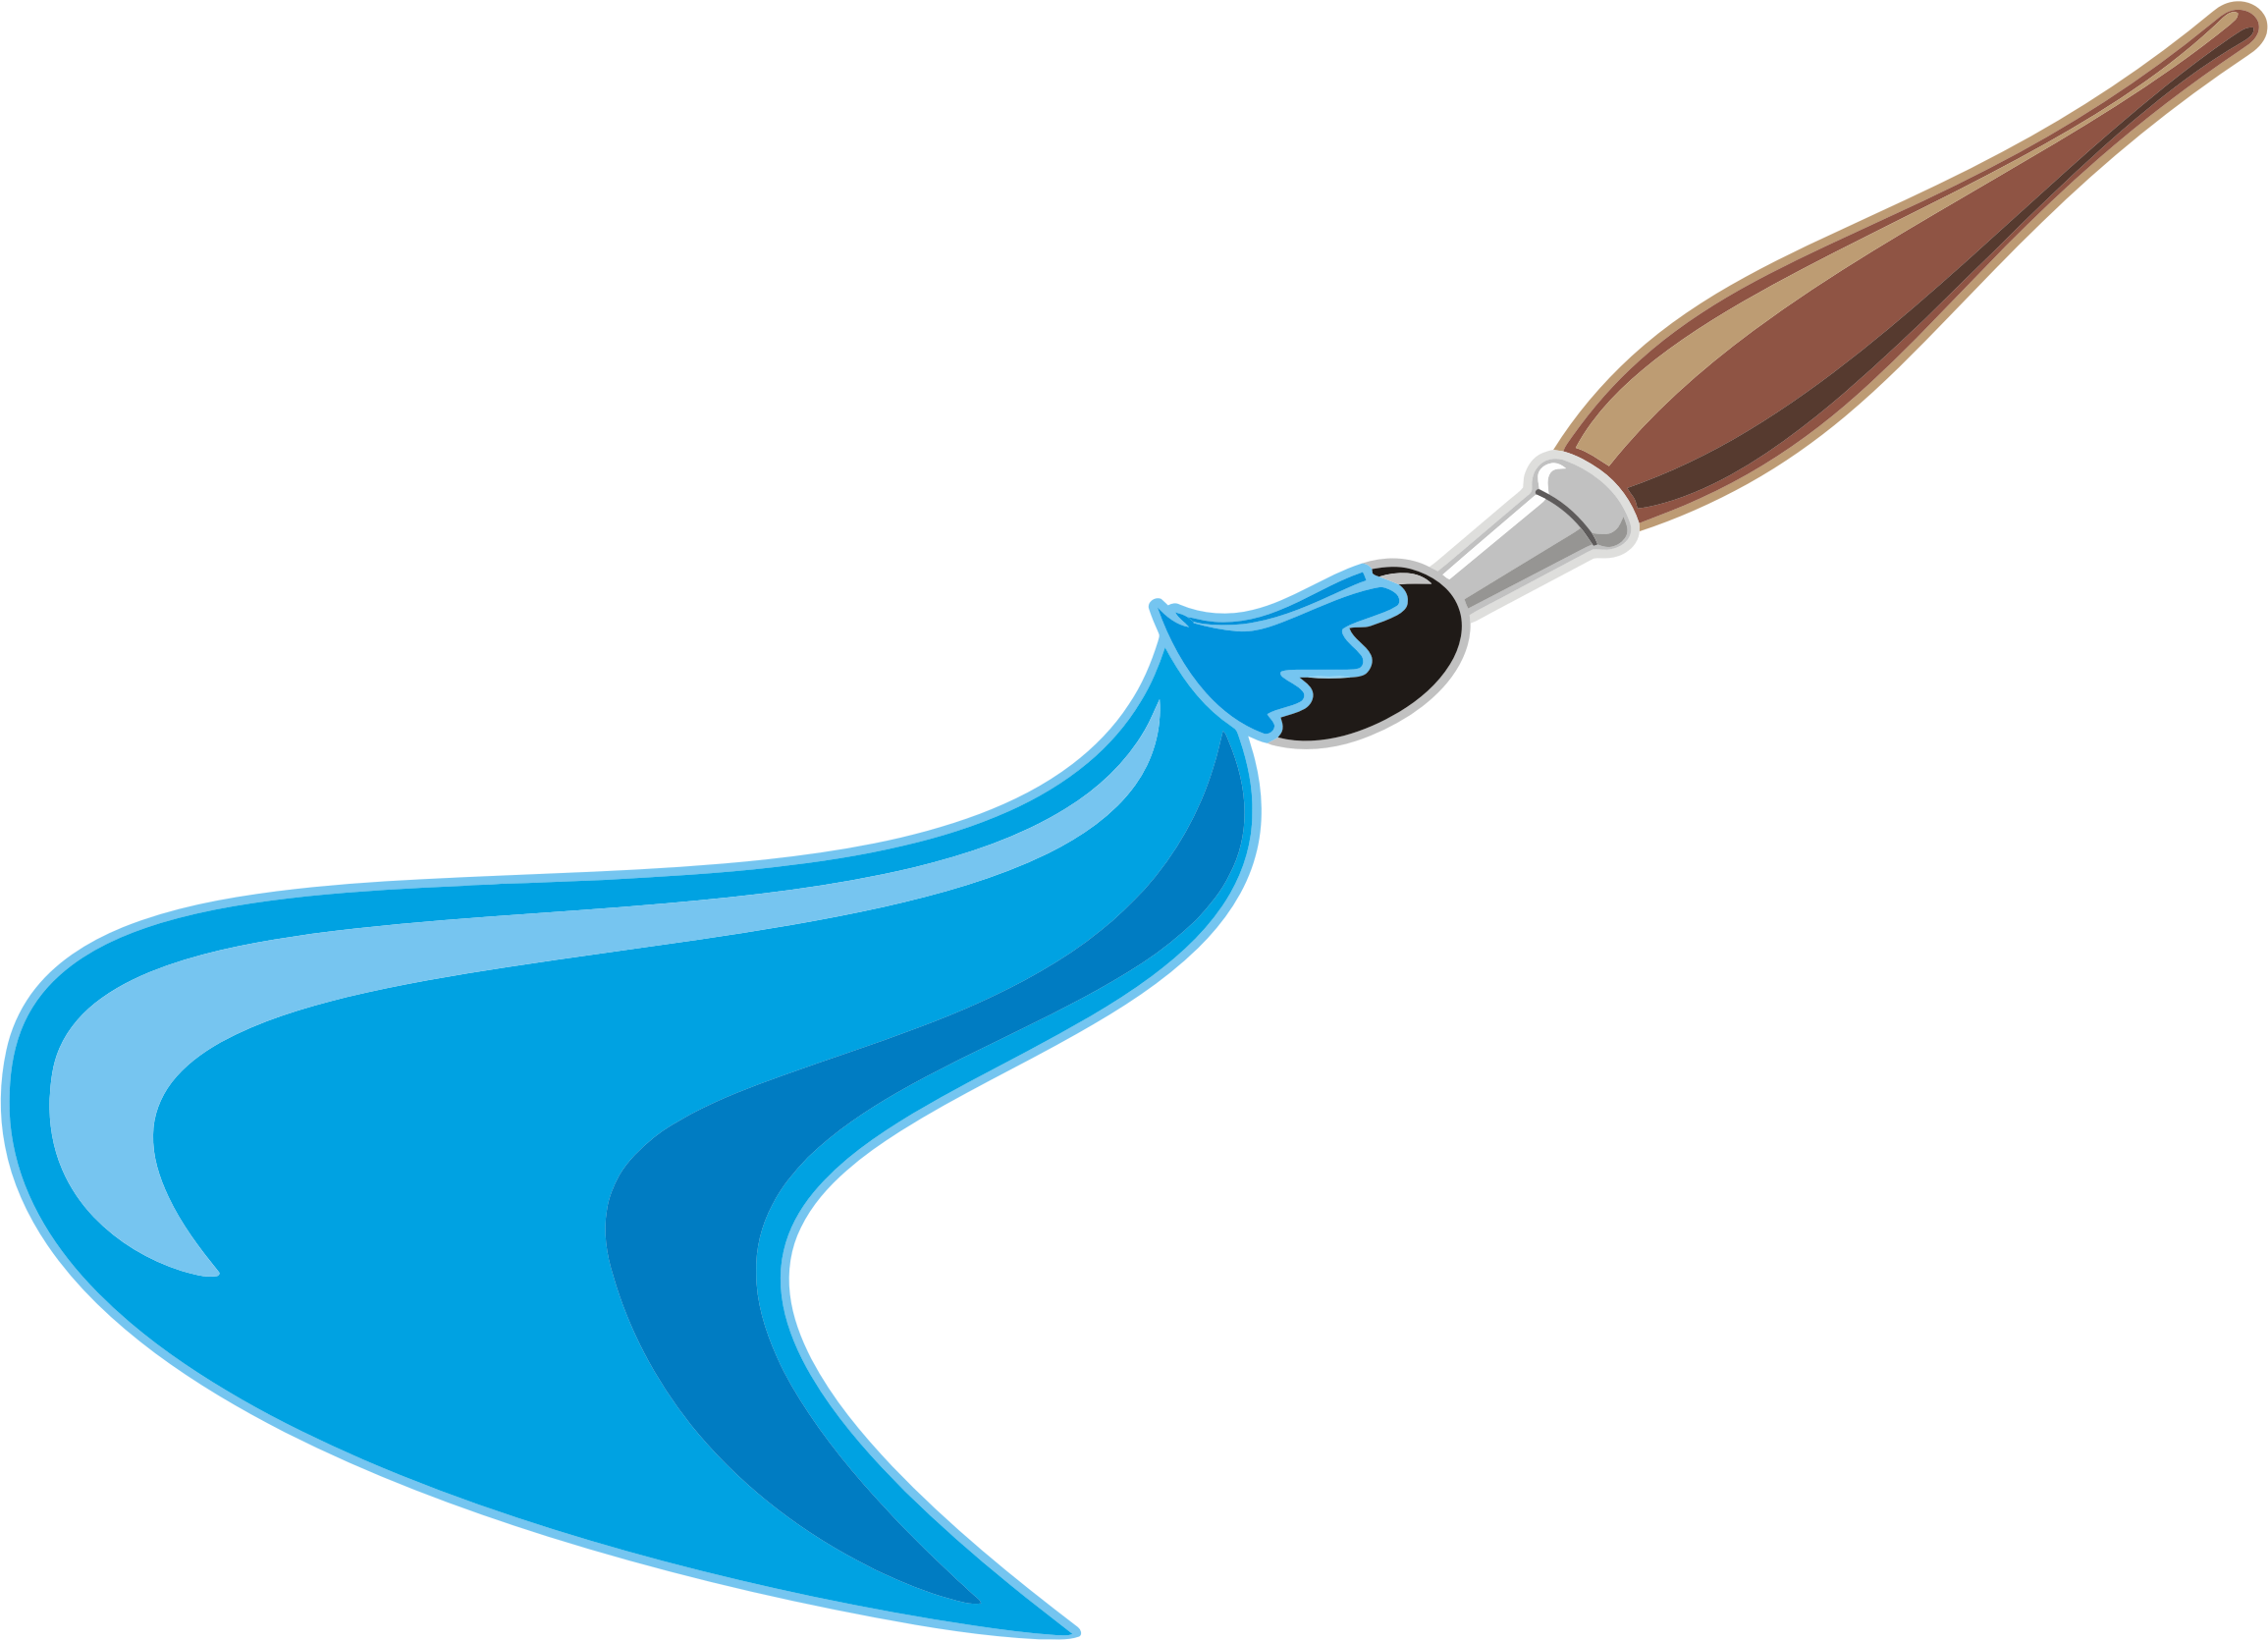 Brush Vector Png 2310 X 1670